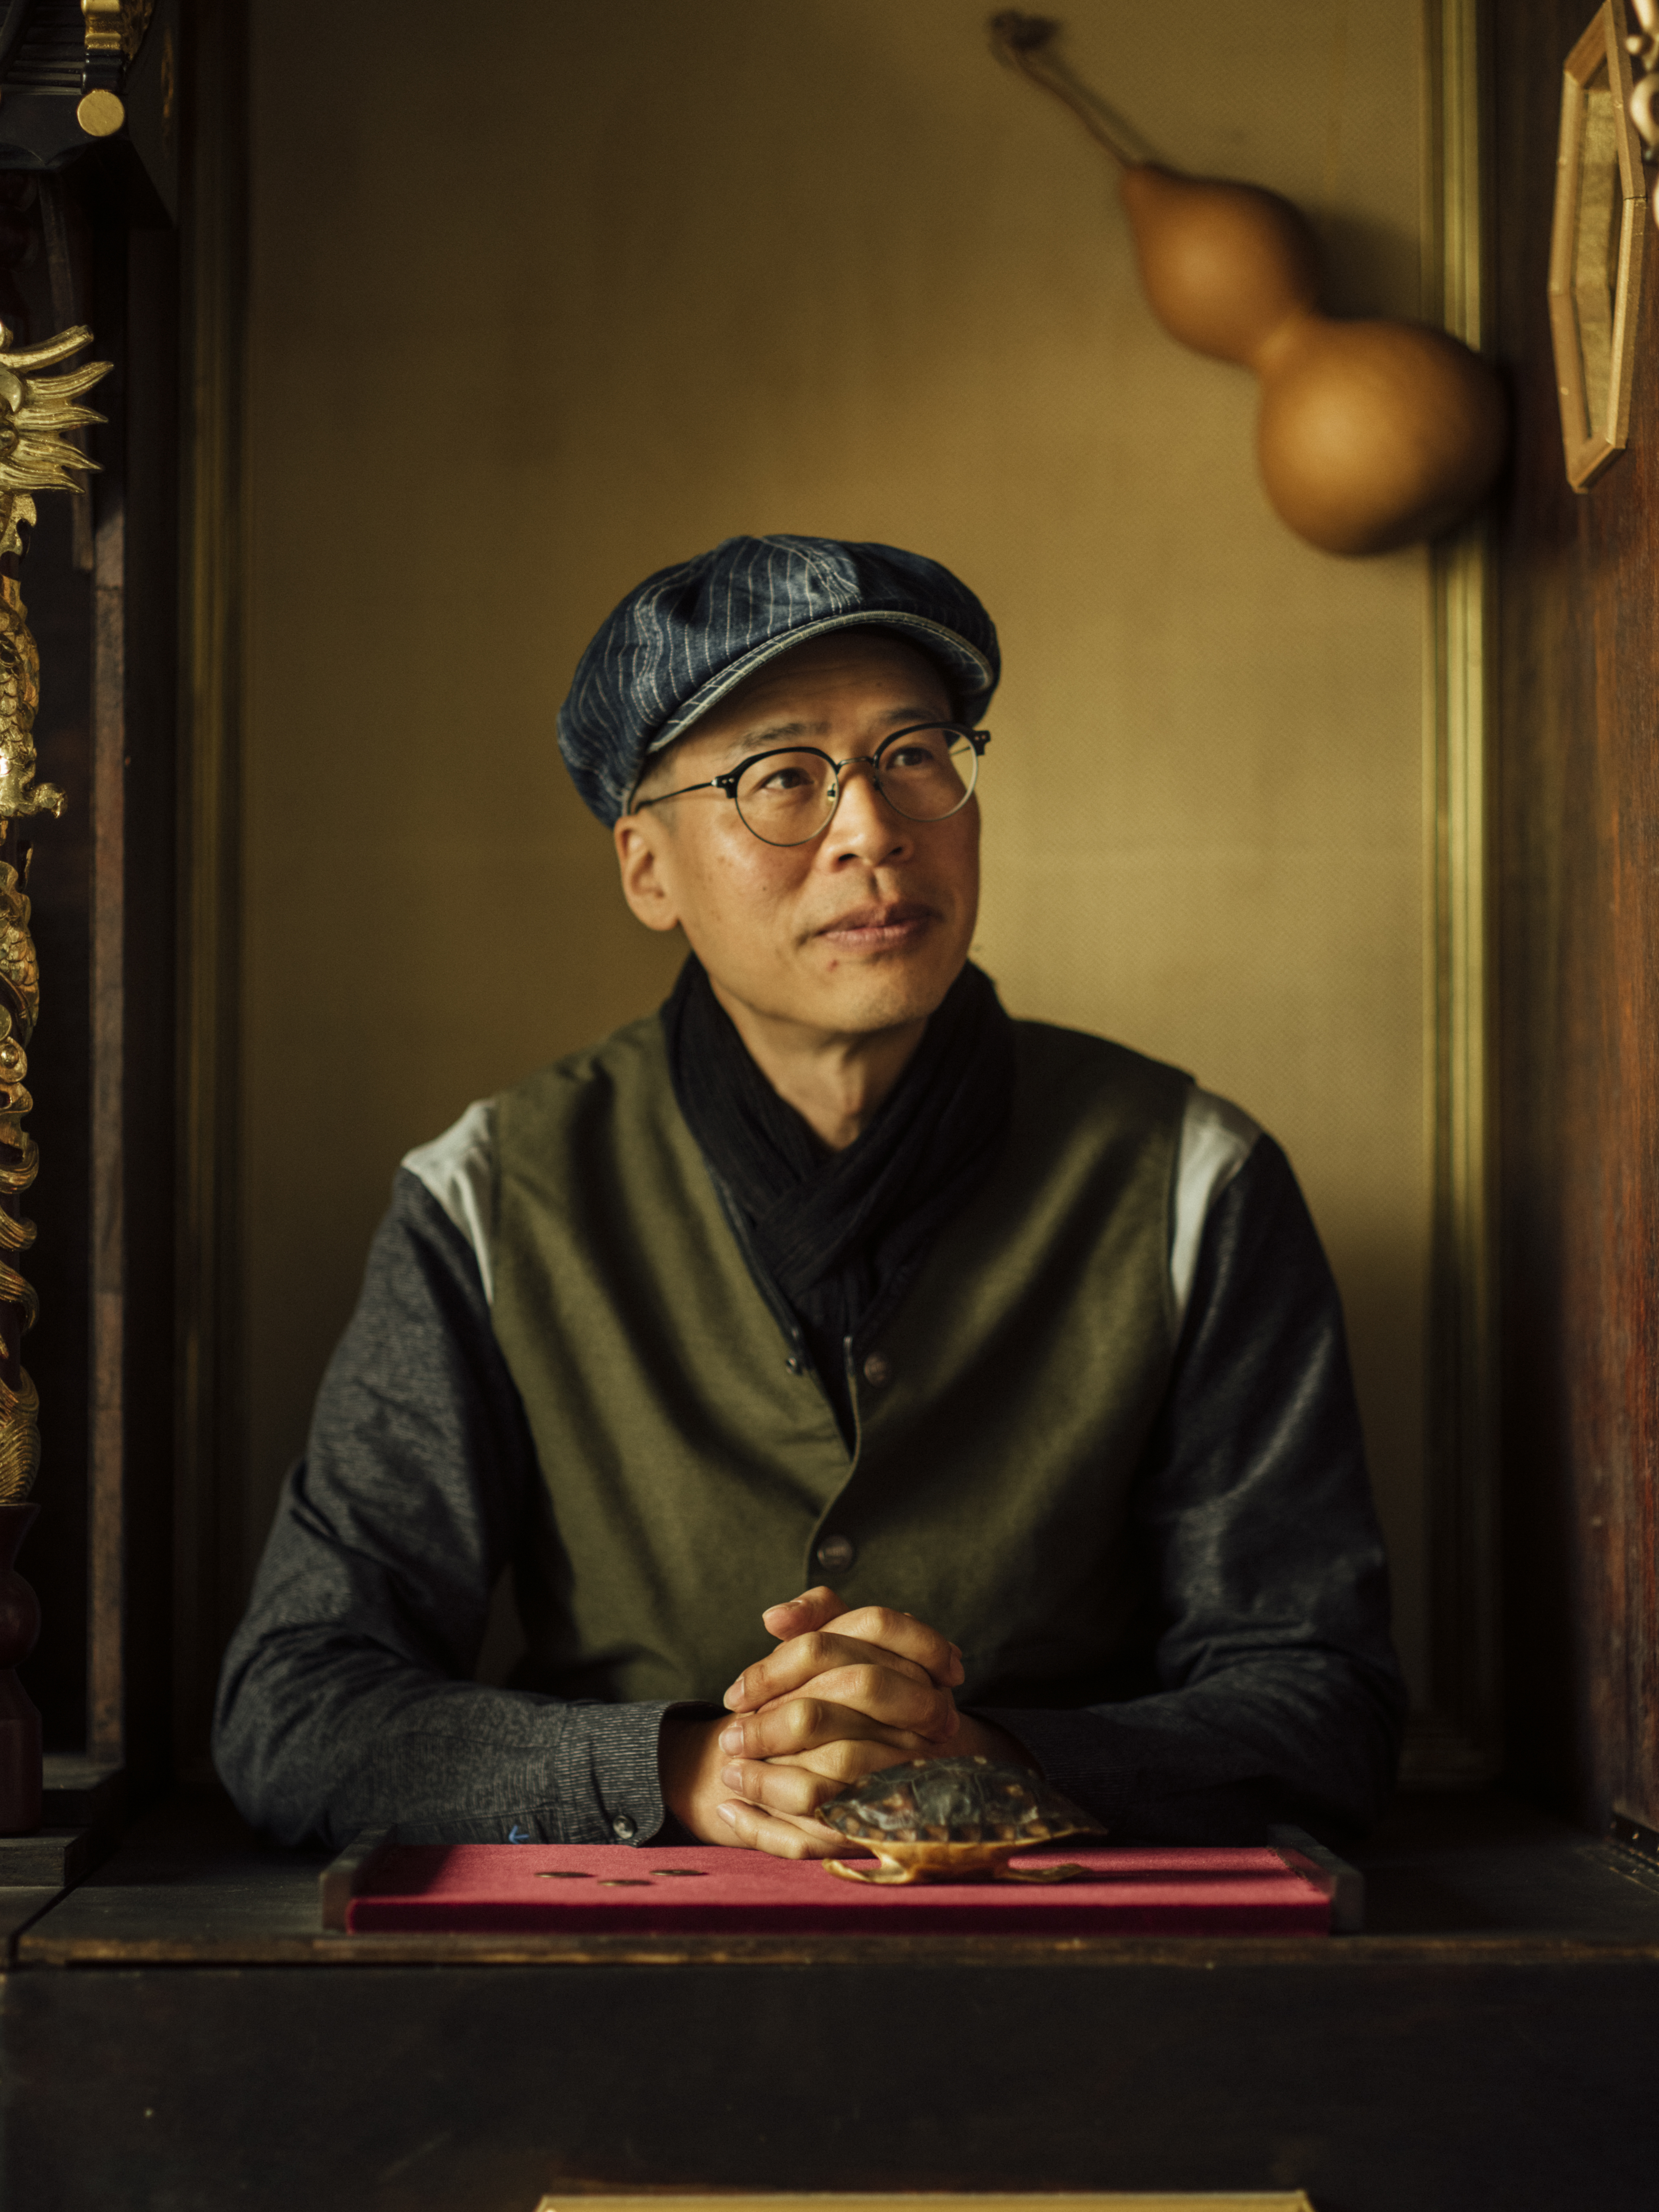 Hong Kong artist and activist living in exile in Taiwan (53 years old).